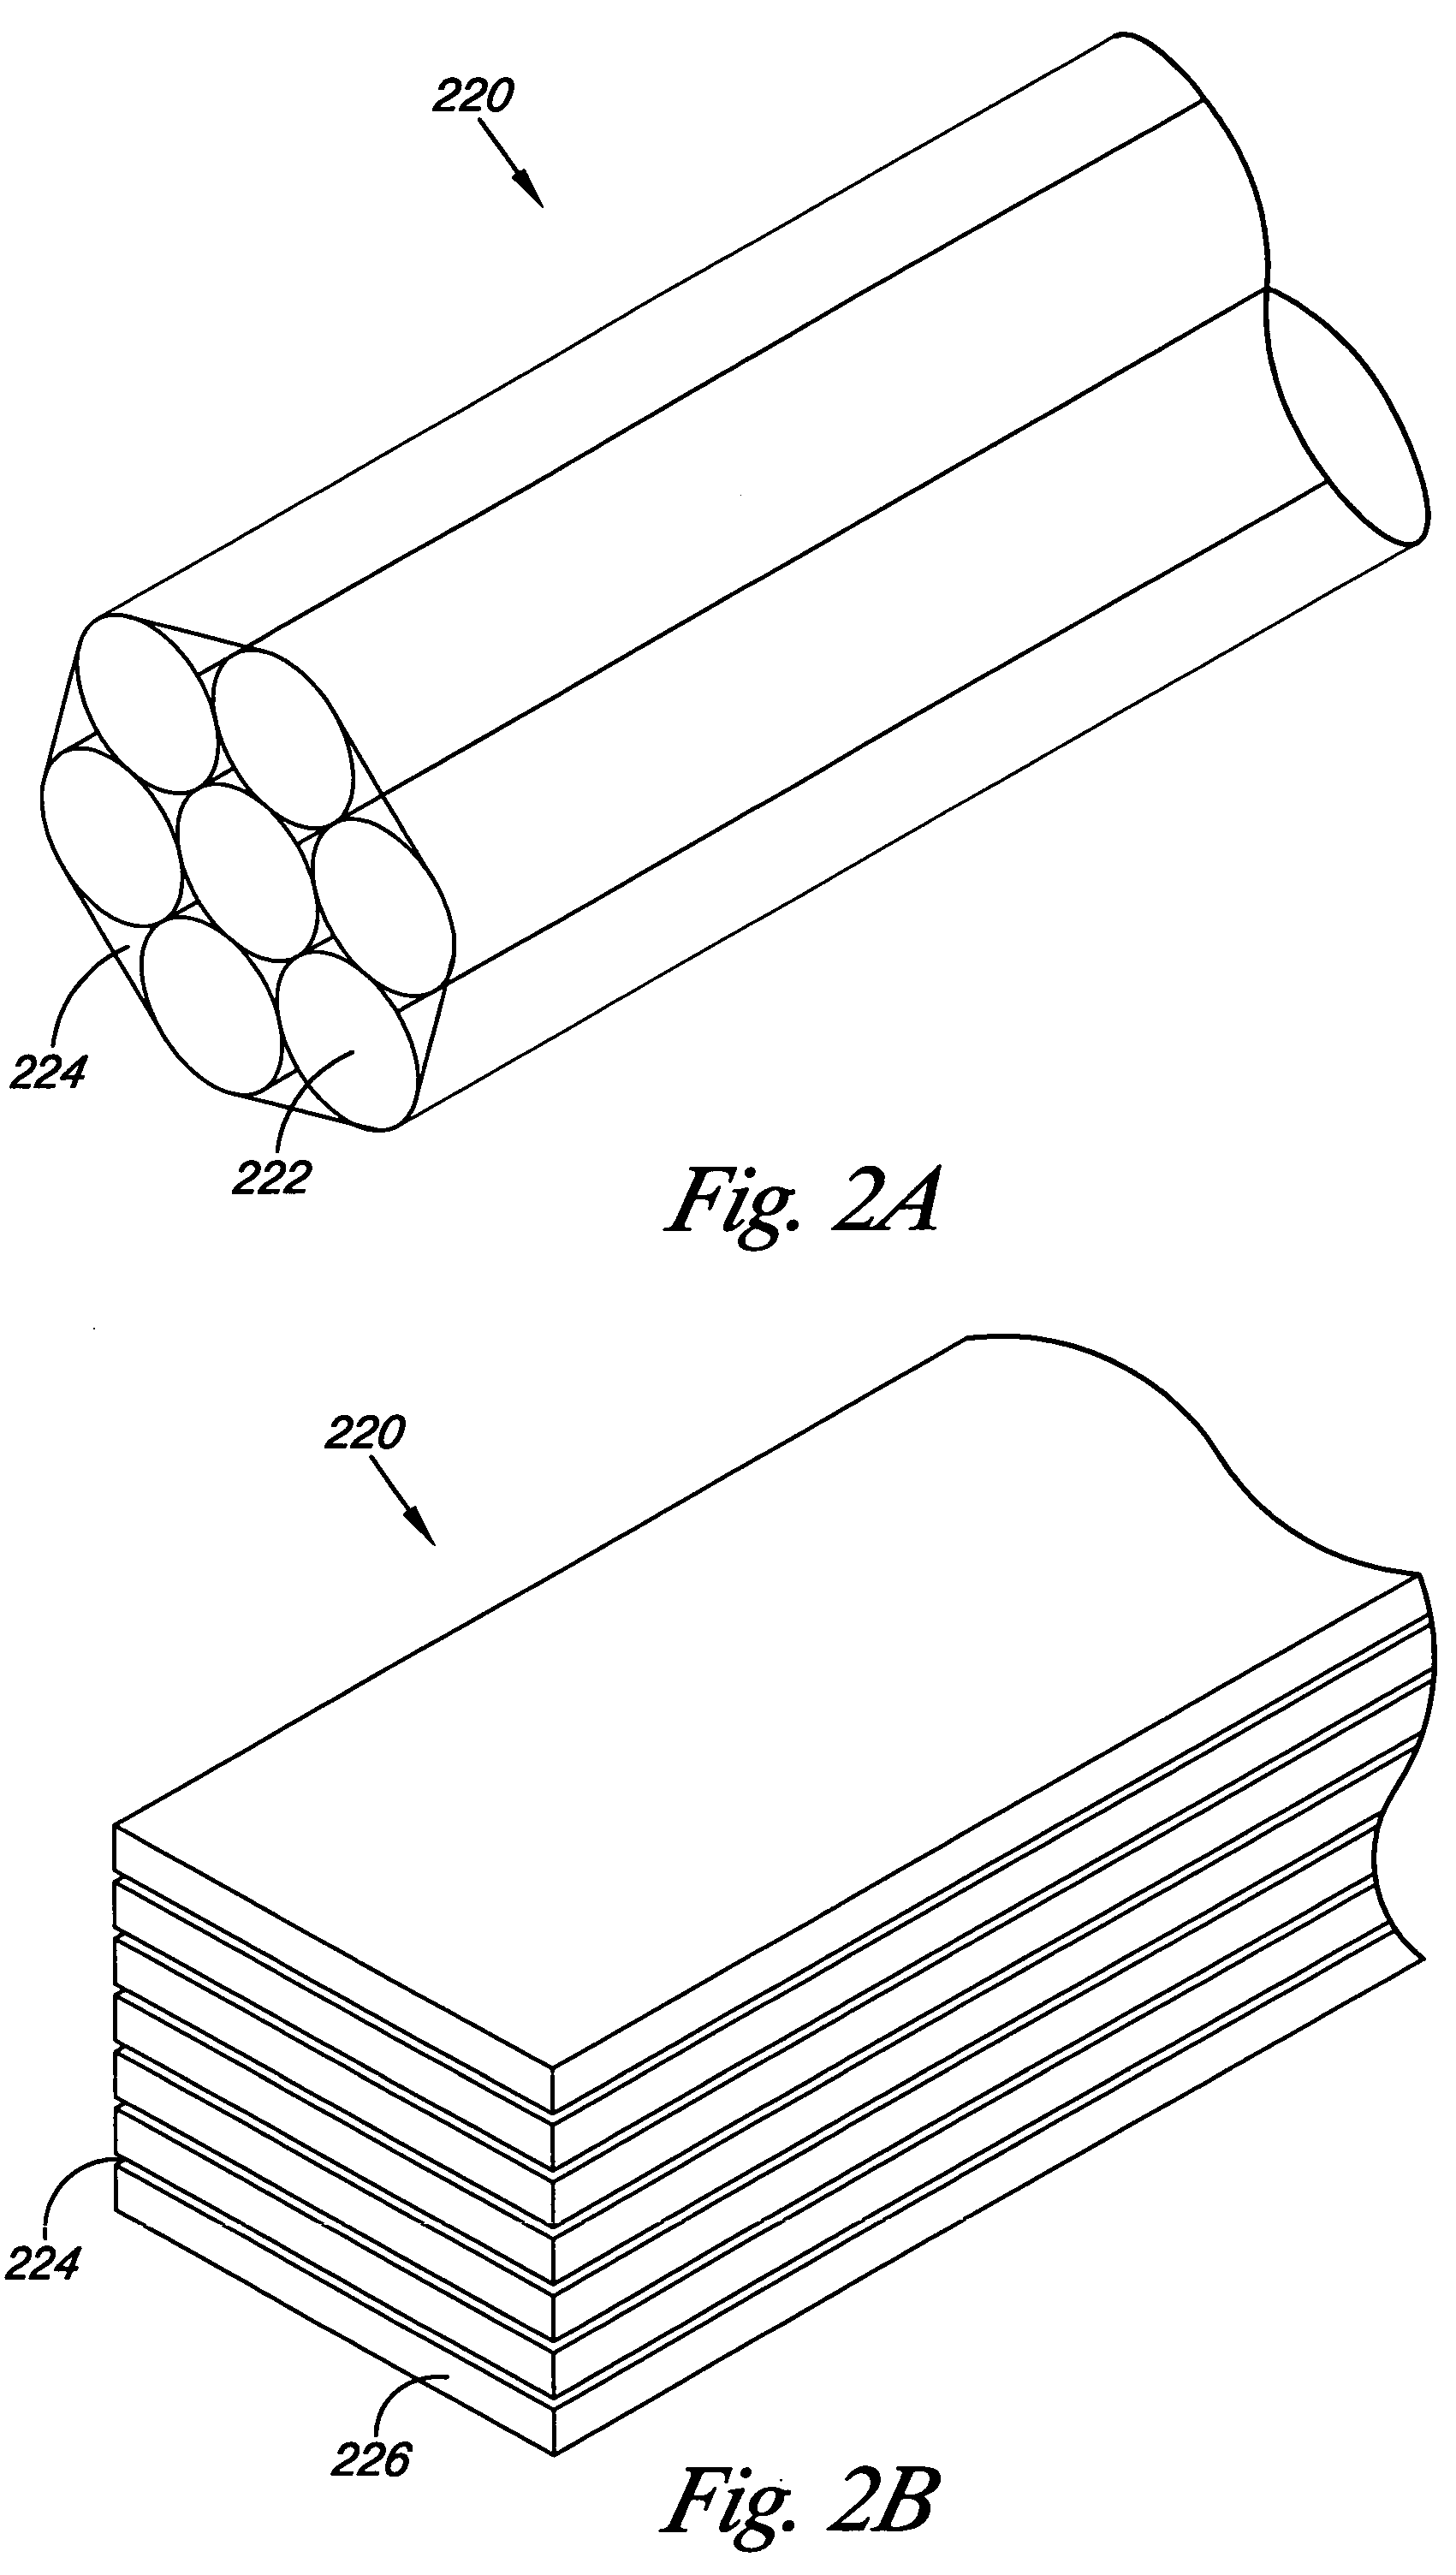 Electrode apparatus, systems and methods